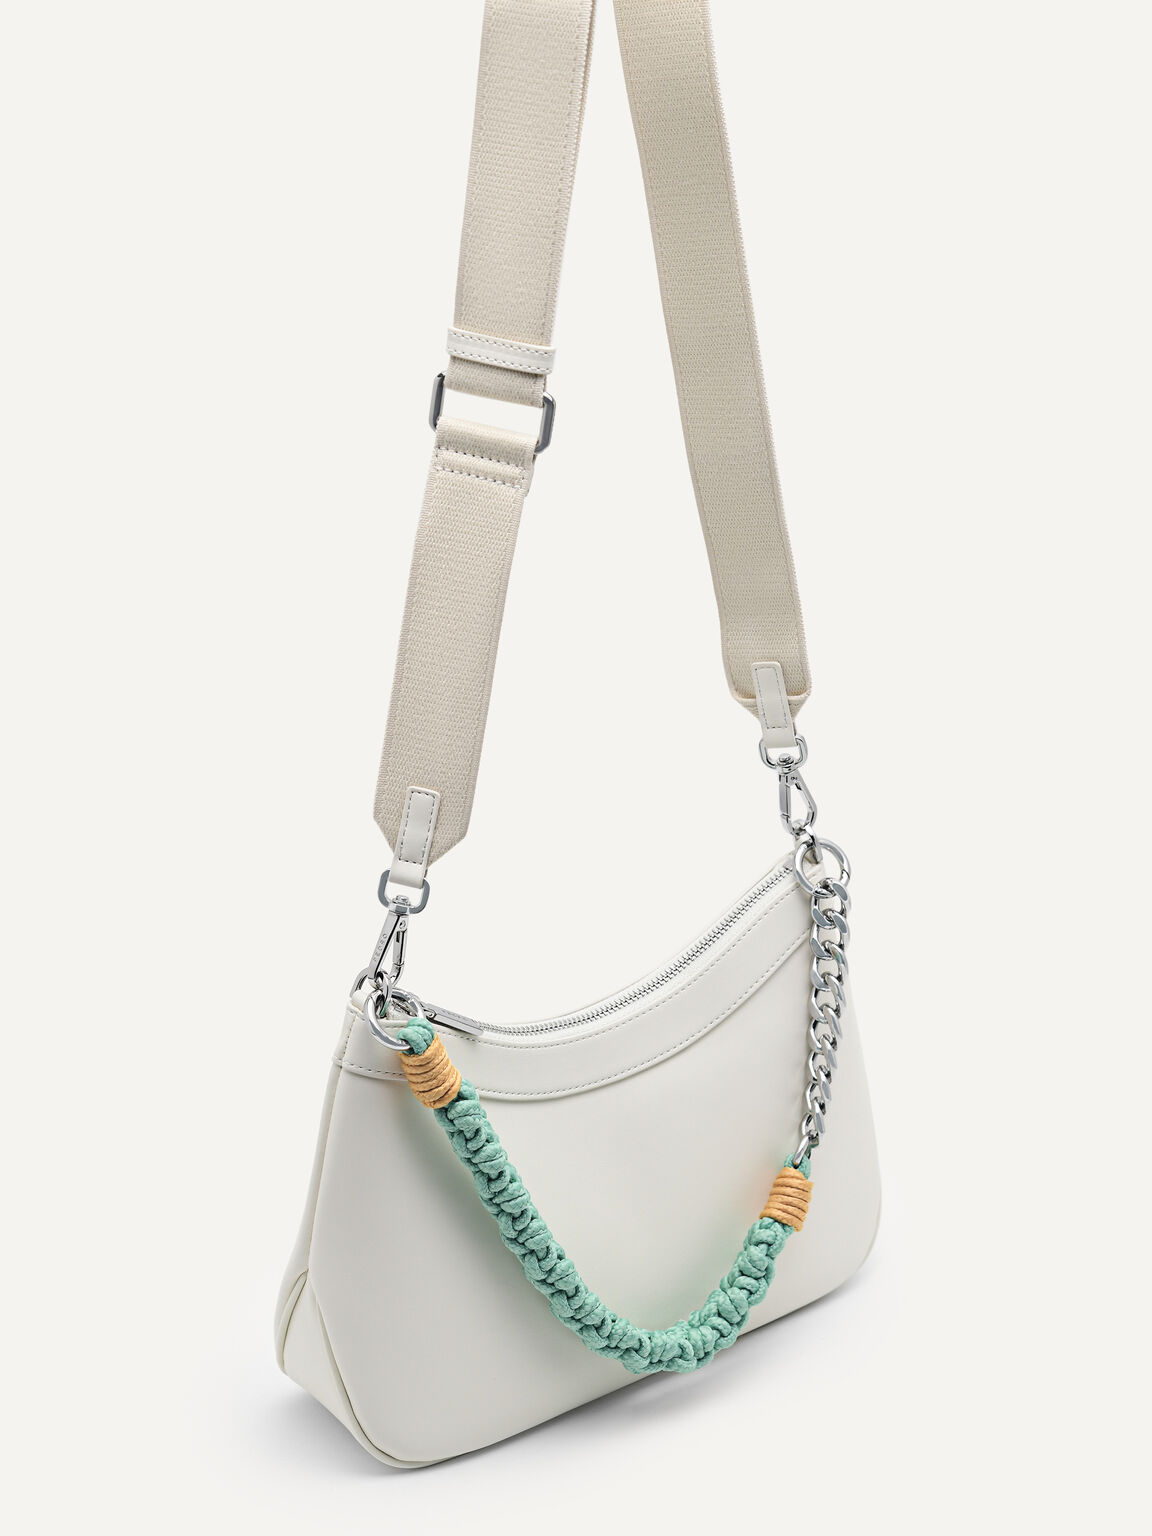 Slouchy Shoulder Bag with Braided Chain, Chalk